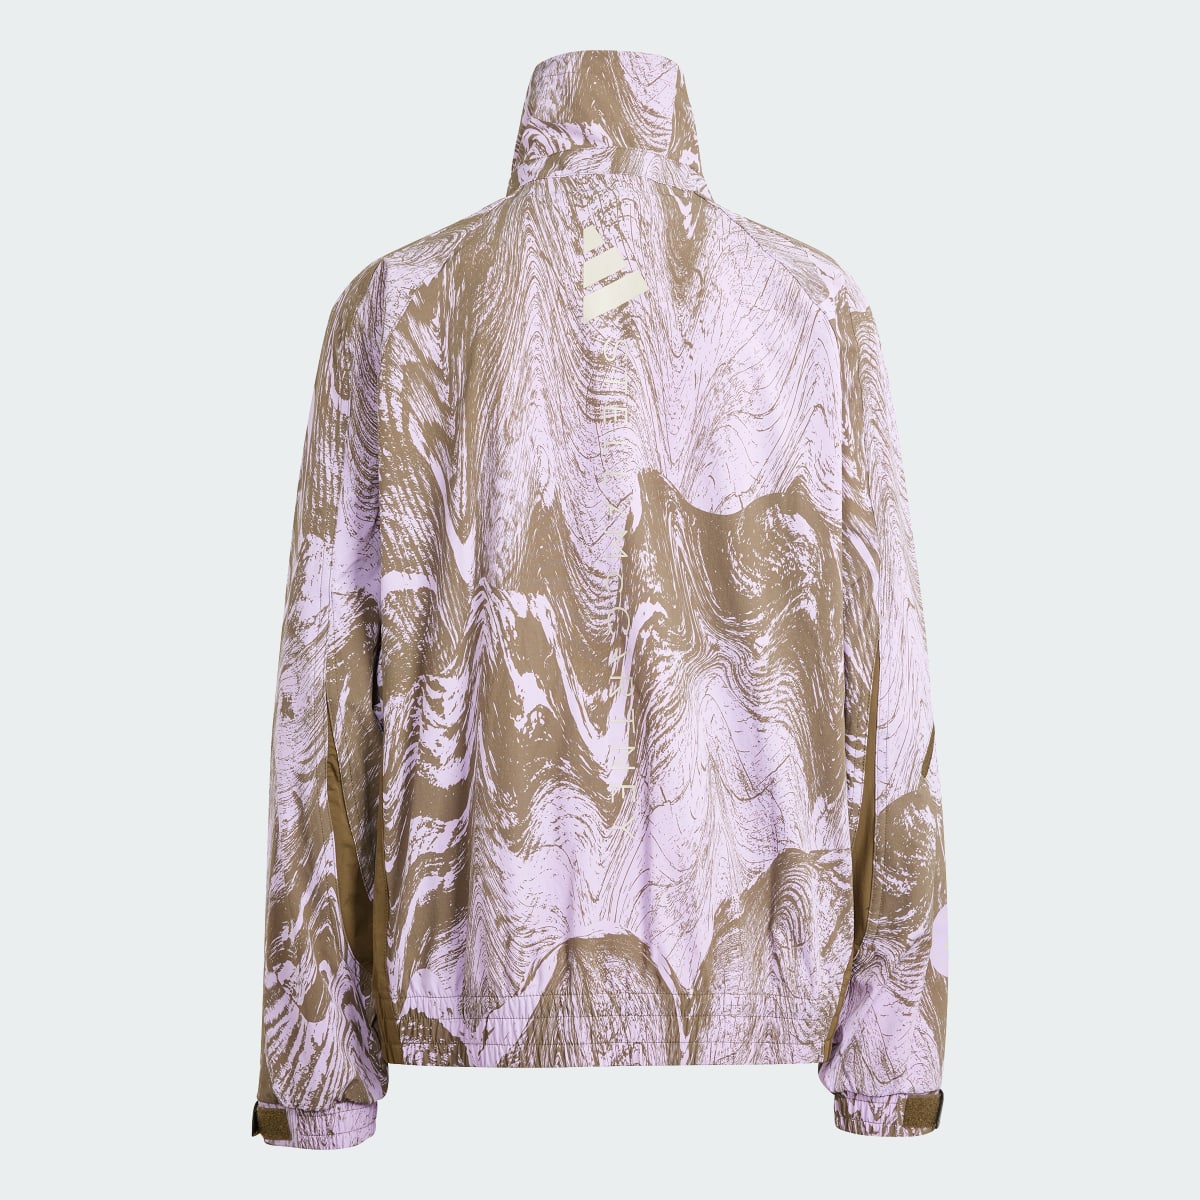 Adidas by Stella McCartney TrueCasuals Woven Track Top. 6